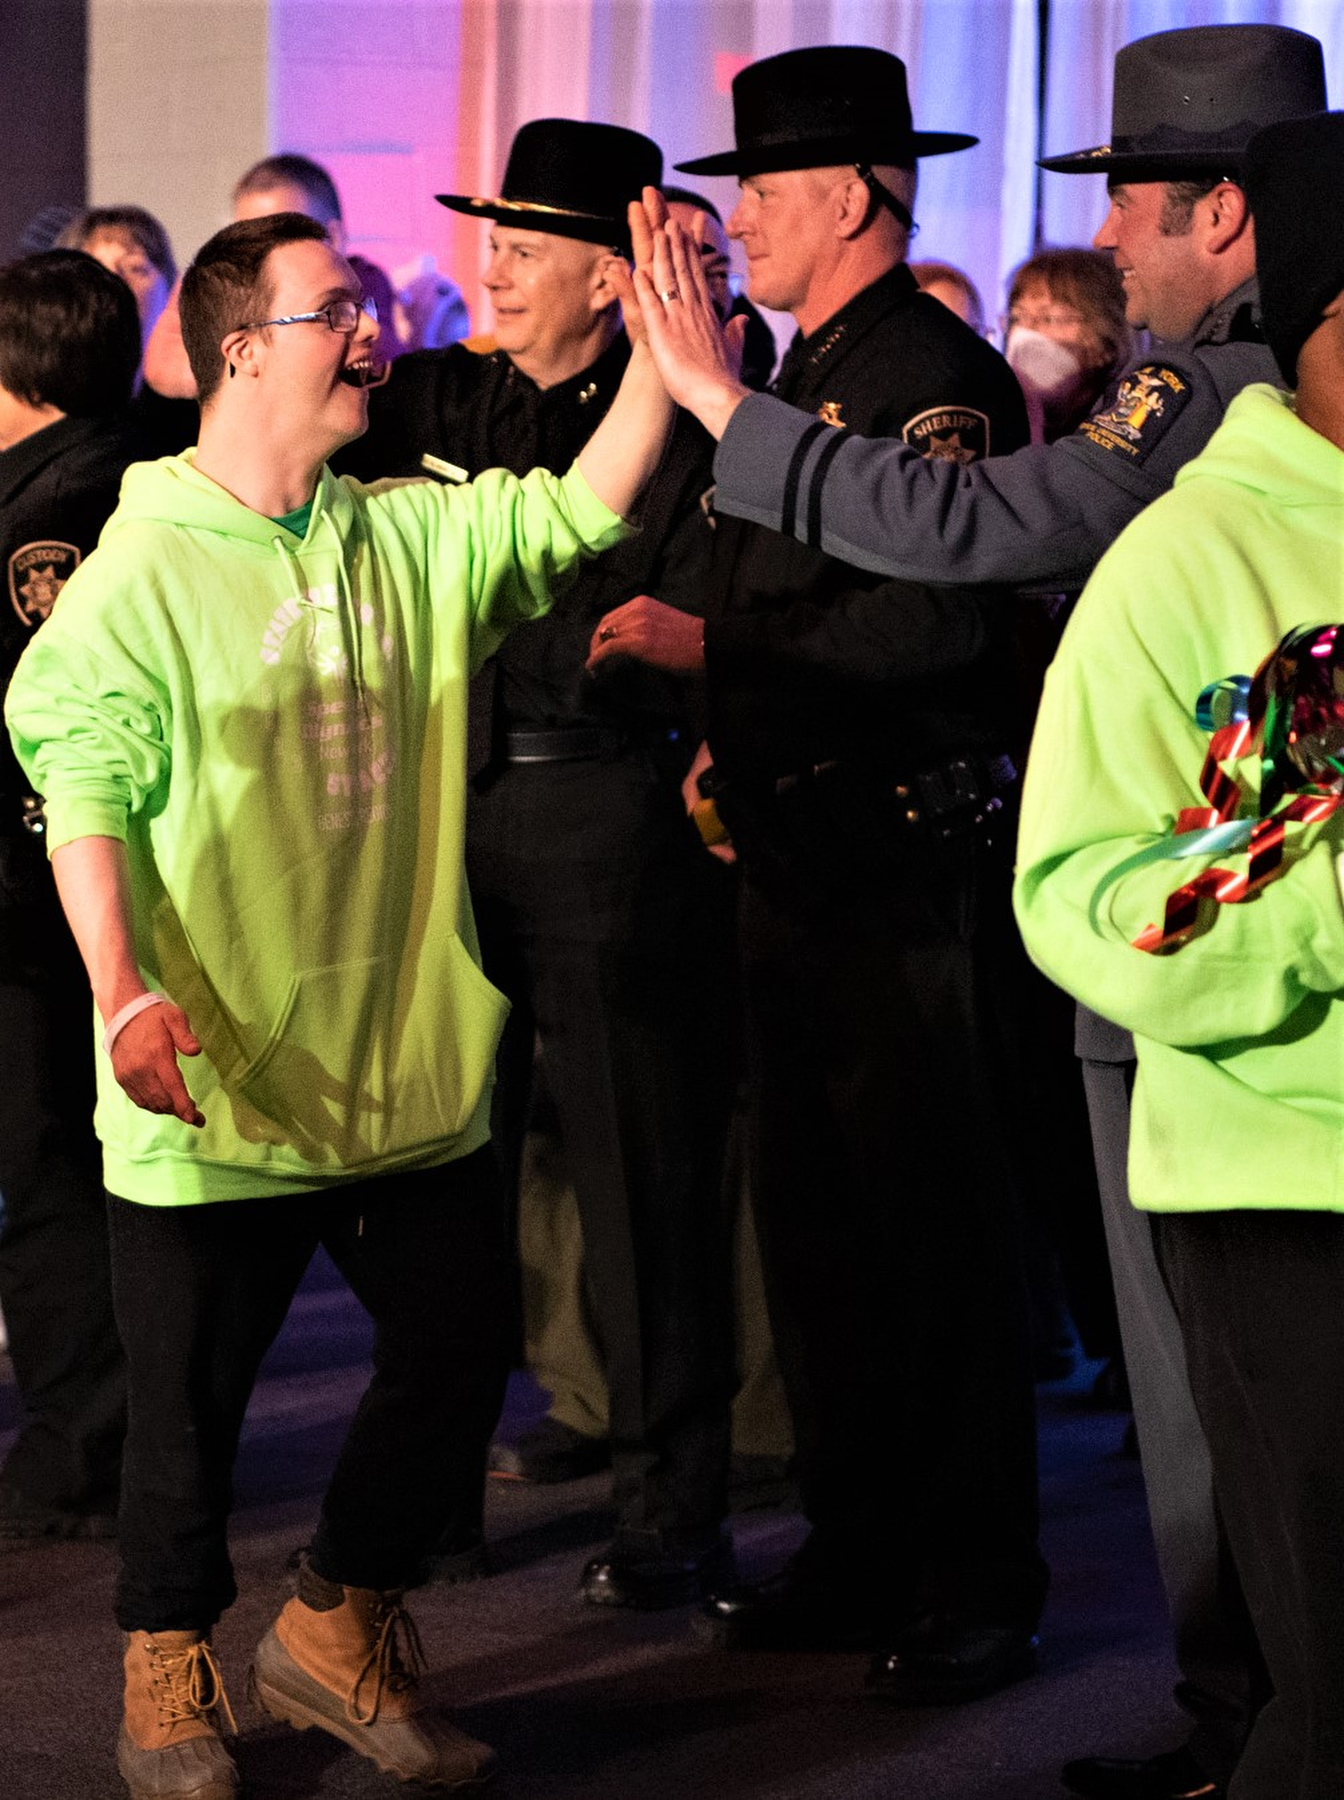 University Police Chief Scott Swayze high-fives a participant at the New York Special Olympics Opening Ceremonies with more than 500 athletes on Feb. 24 in Syracuse. 